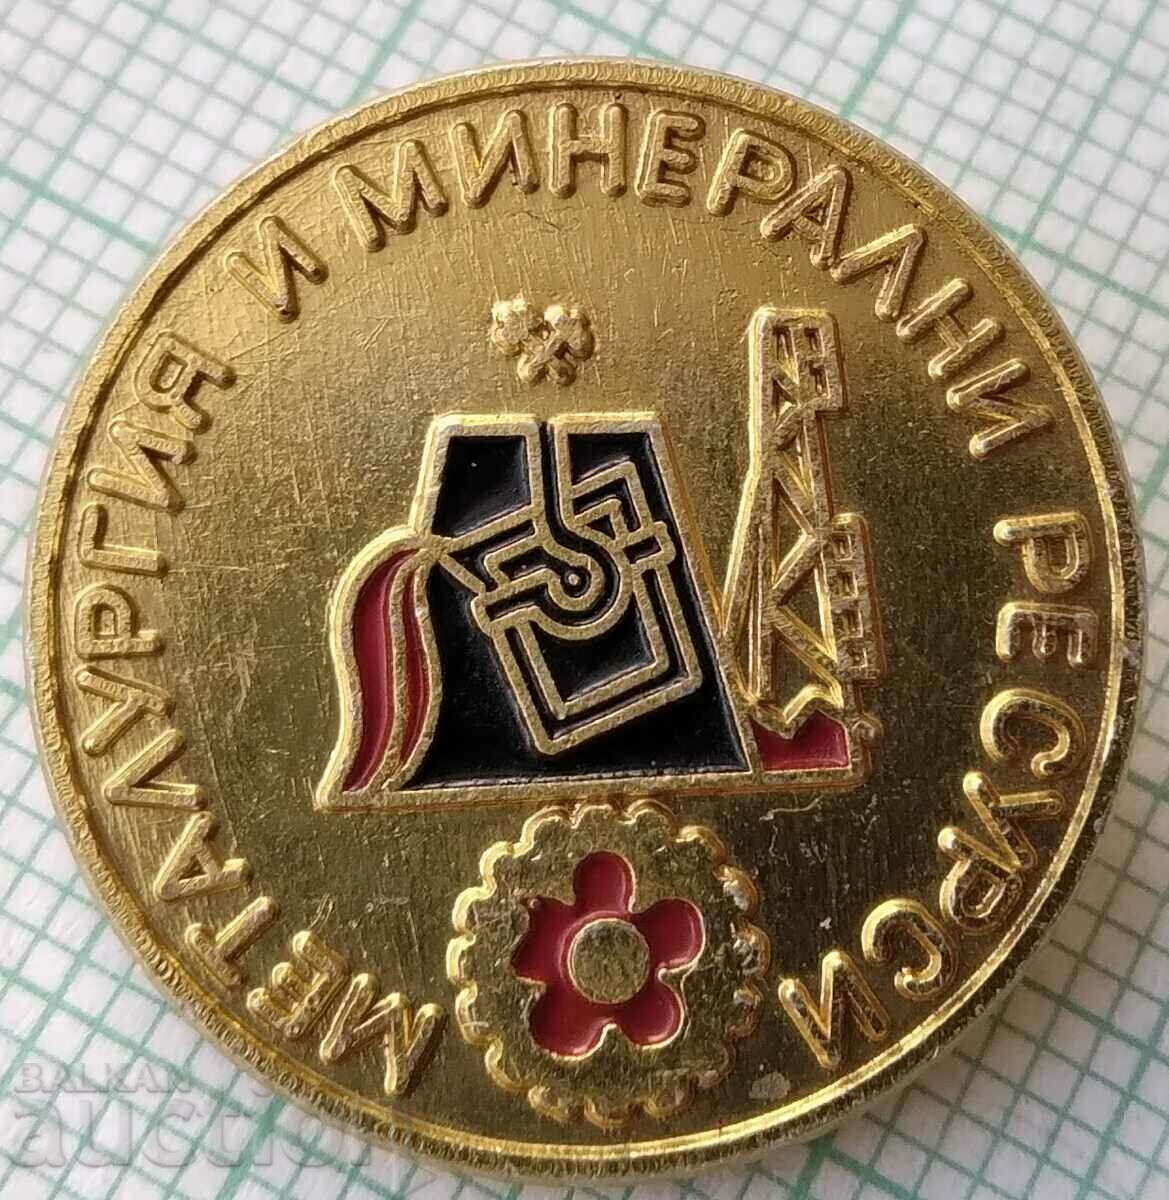 15616 Badge - Metallurgy and mineral resources